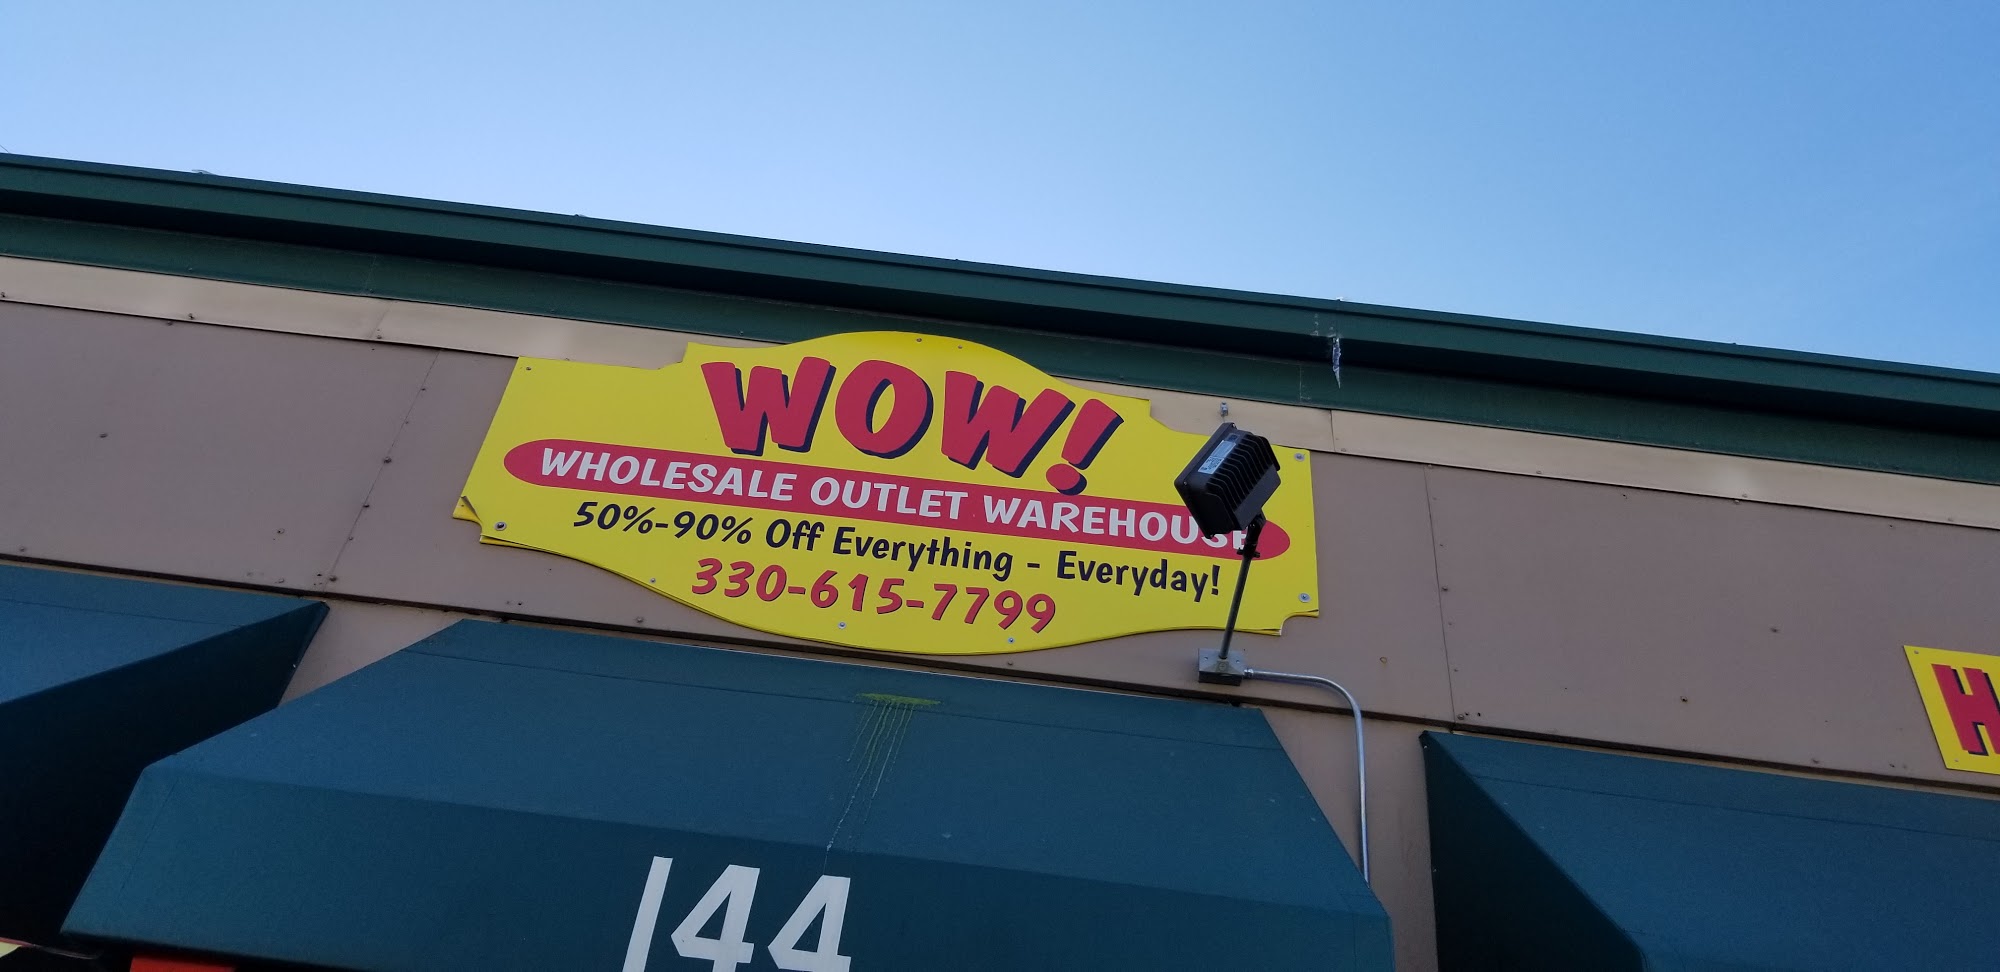 WOW - Wholesale Outlet Warehouse